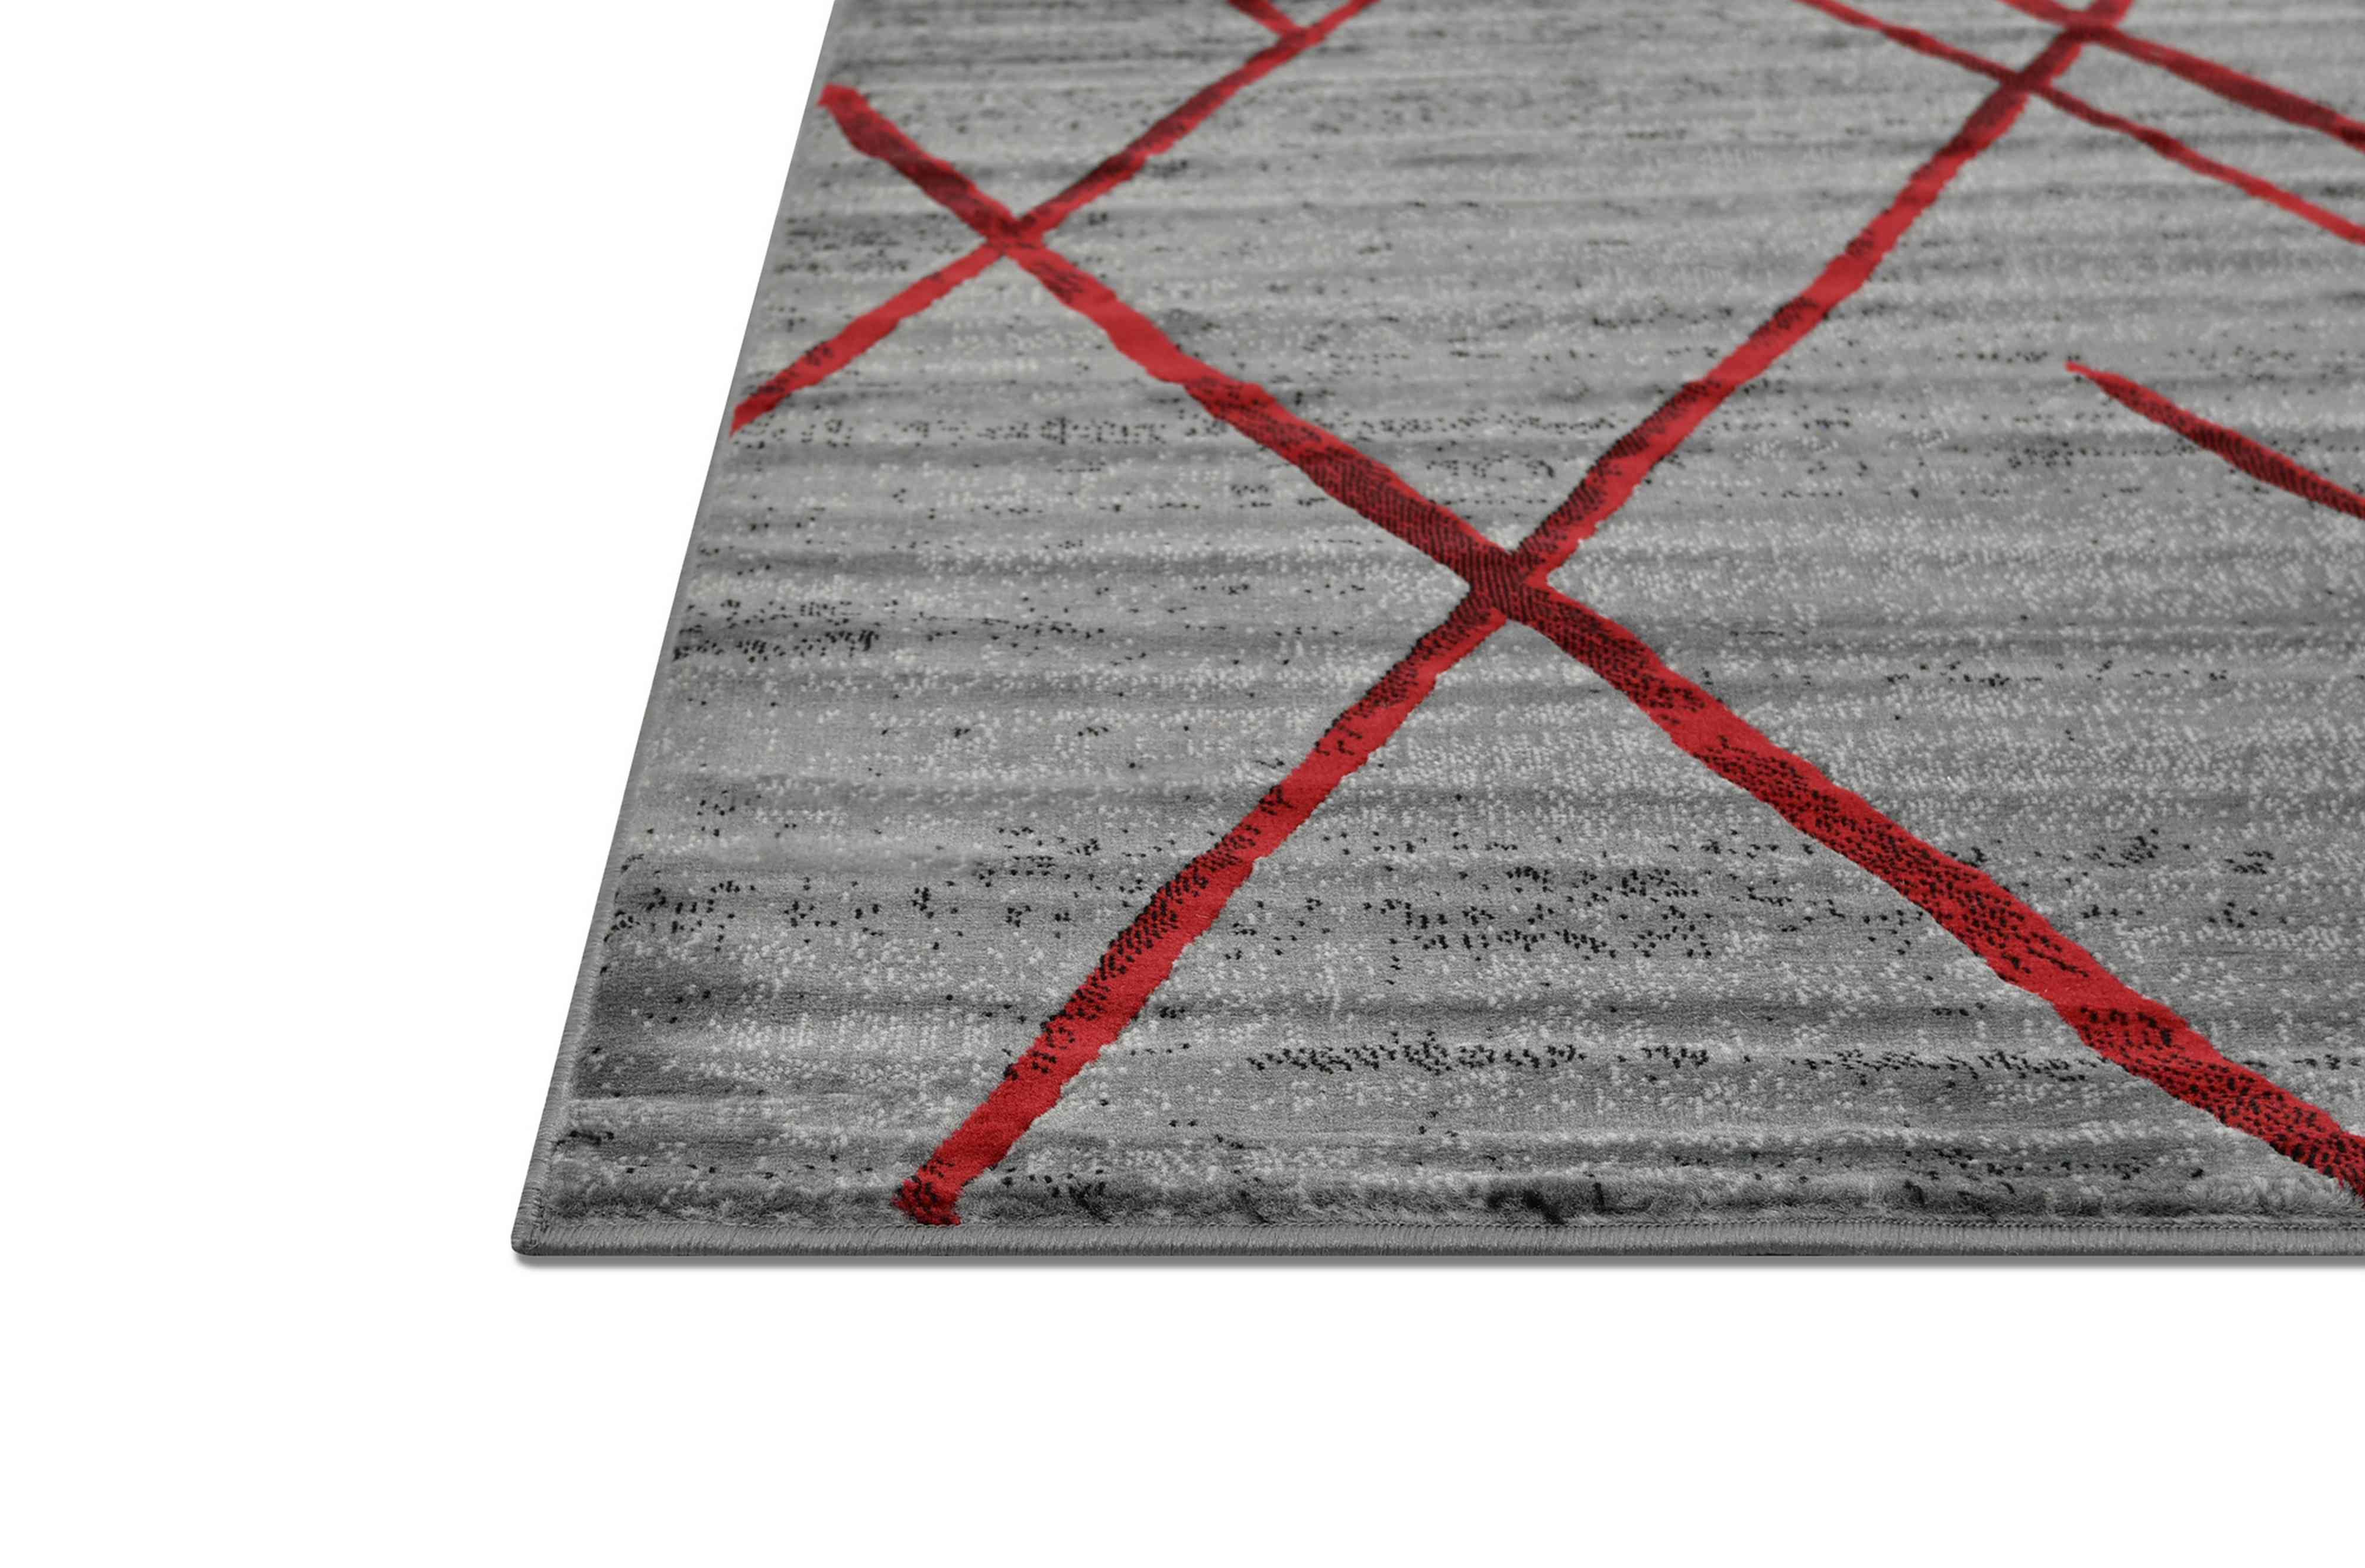 Diamond Pattern Contemporary Abstract Area Rug